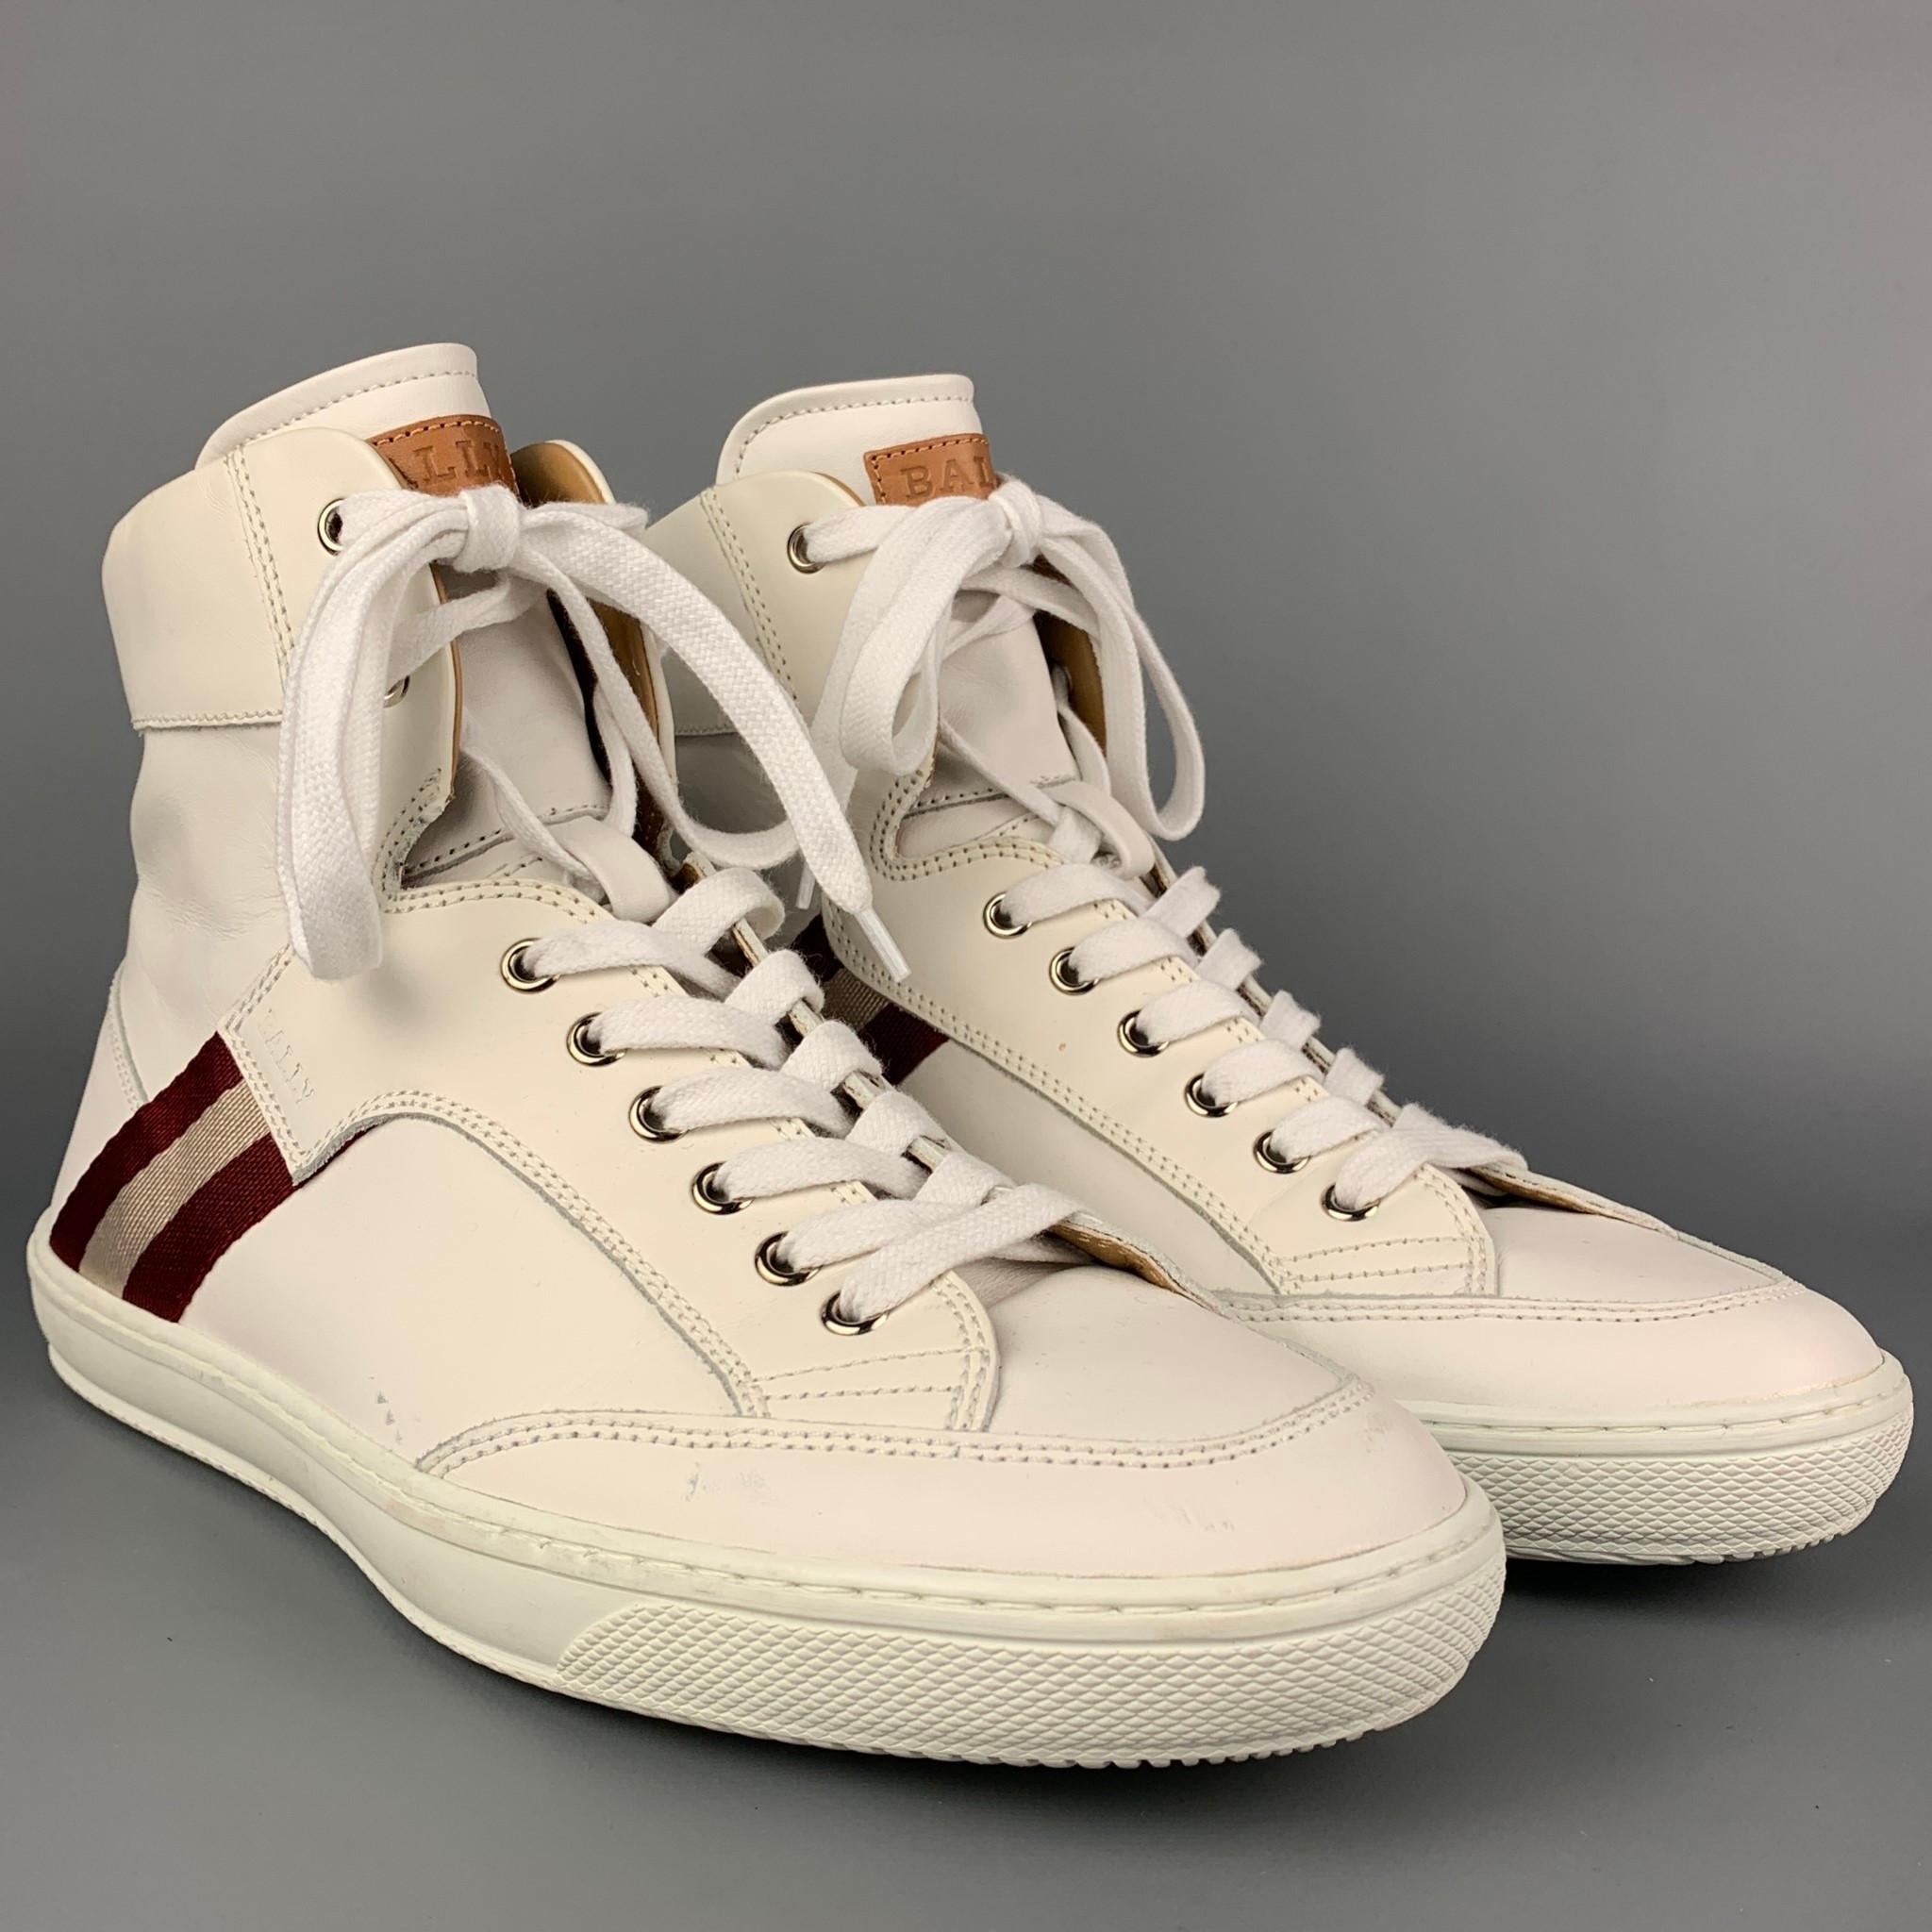 BALLY sneakers comes in a white & burgundy leather featuring a high top style, ribbon trim, and a lace up closure. Made in Italy. 

Very Good Pre-Owned Condition.
Marked: 8 EU  9 US
Original Retail Price: $550.00

Outsole: 11.5 in. x 4 in. 